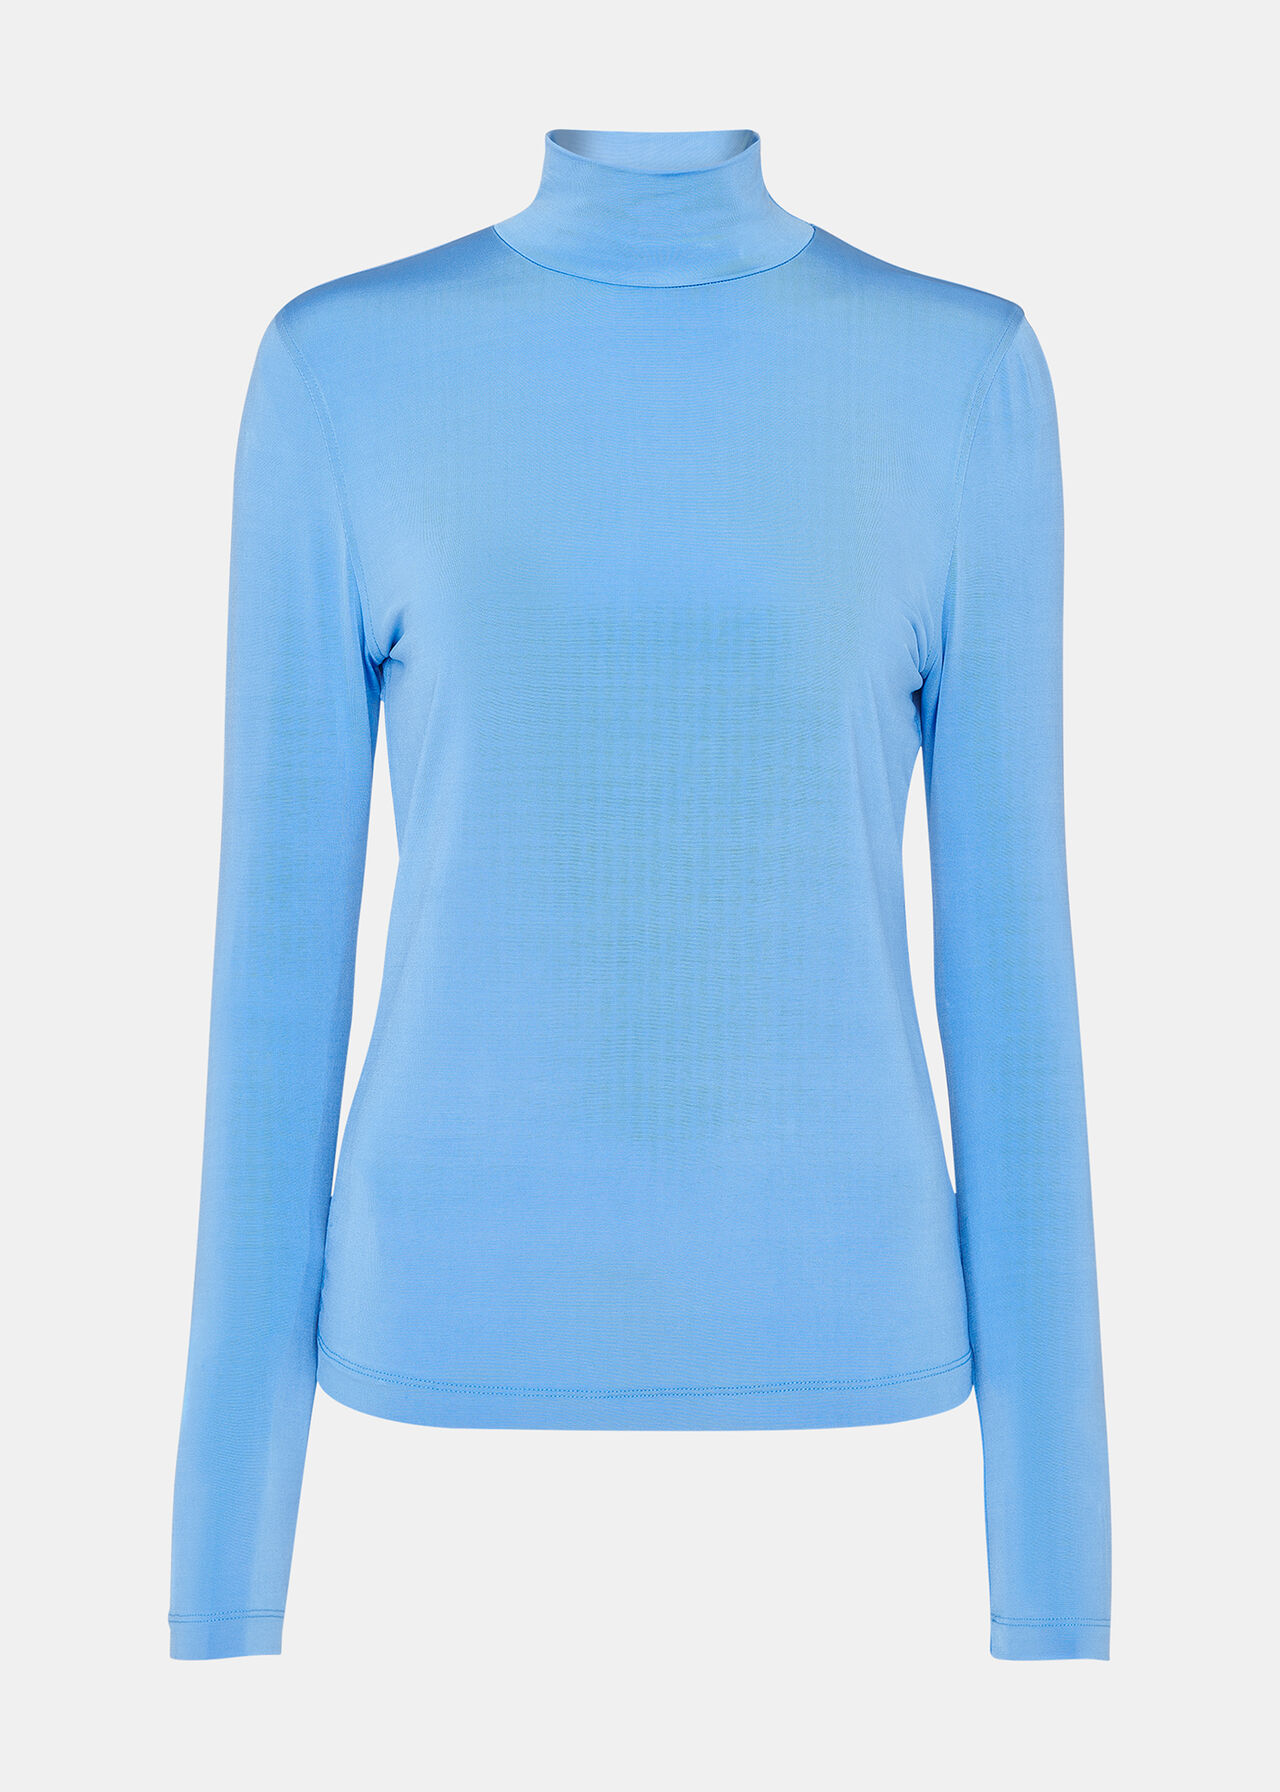 Pale Blue Slinky High Neck Top | WHISTLES